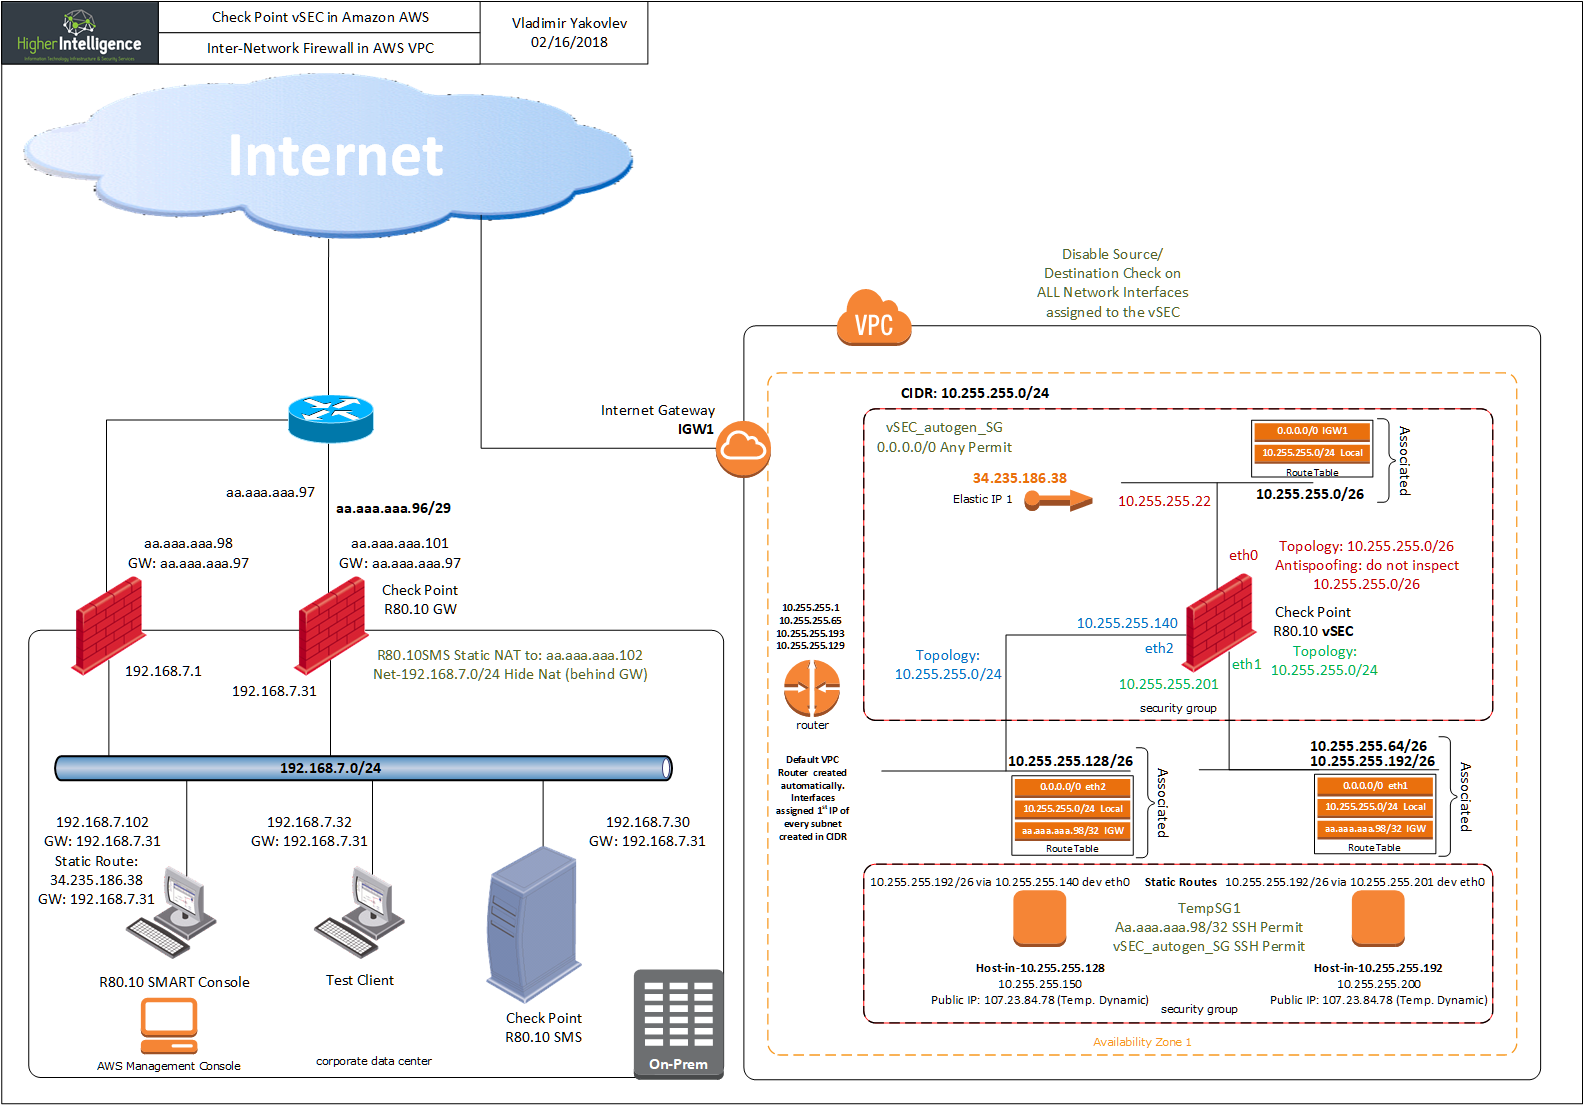 Inter-Network Firewall for AWS VPC